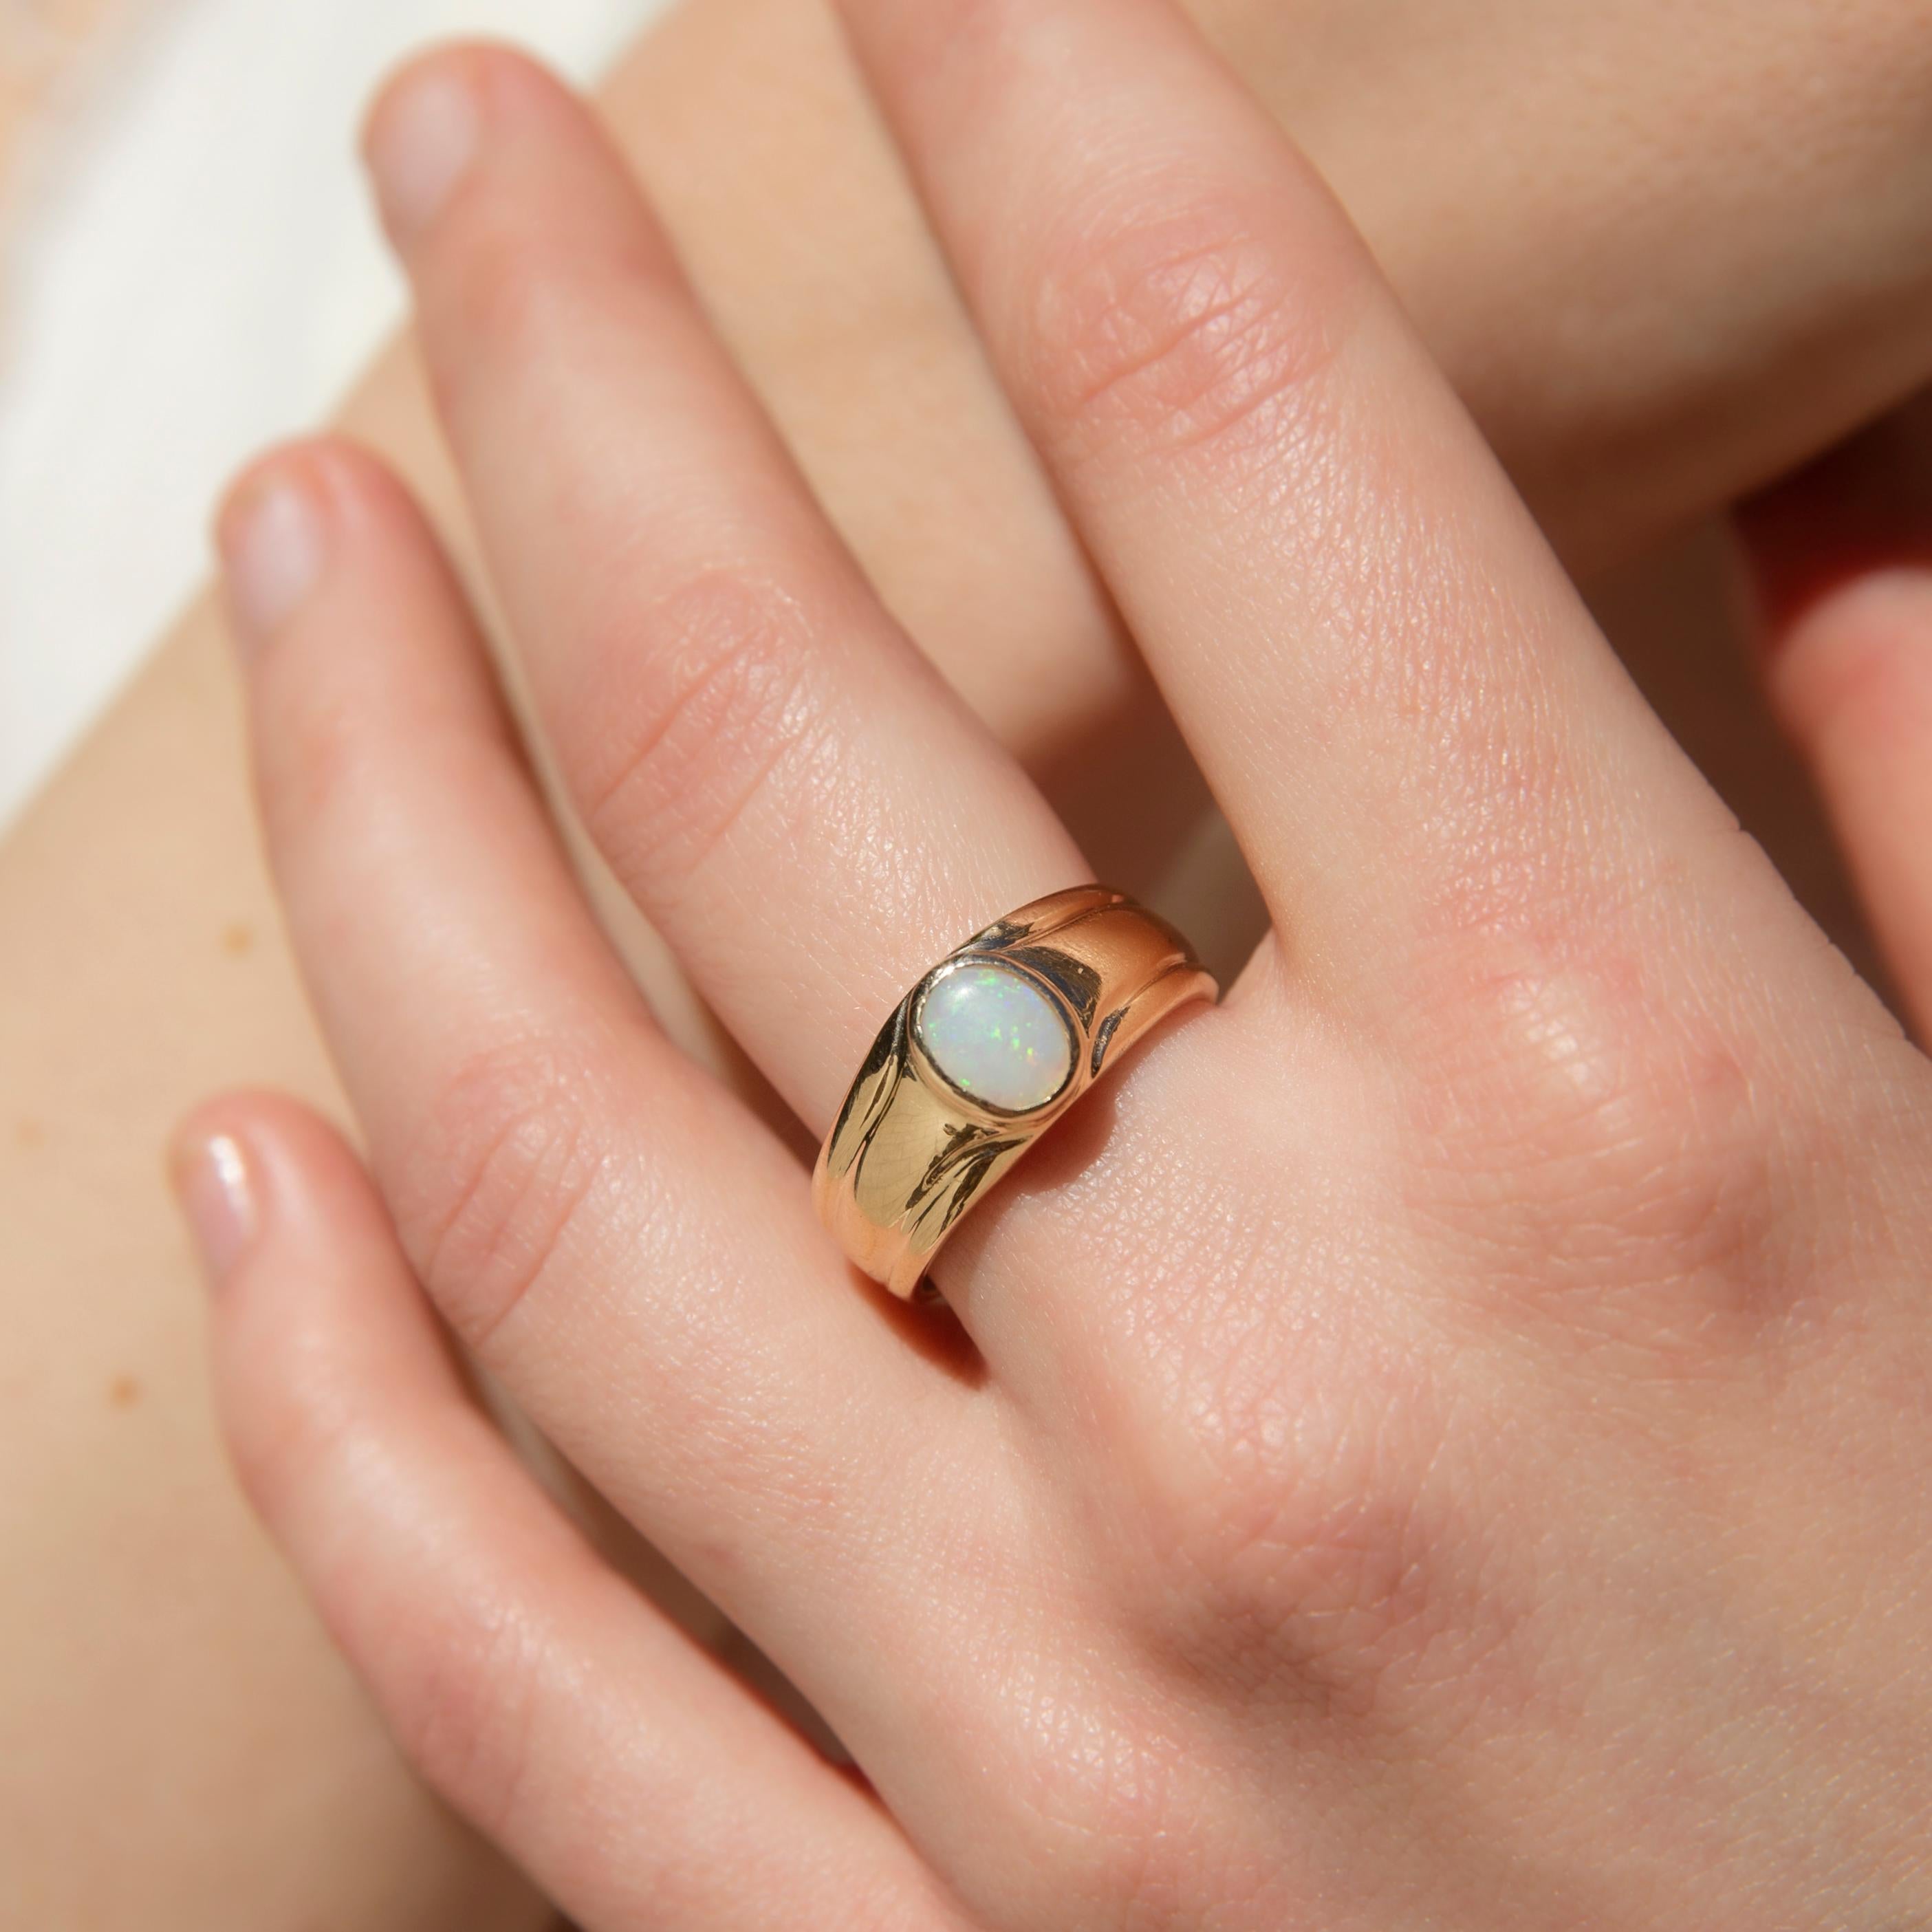 Forged in 9 carat gold, The Lioria Ring has been carefully crafted to last through the centuries. The gorgeous crystal opal flashes blue and green with the slightest of fire. For him or for her it is a sublime choice.

The Lioria Ring Gemstone